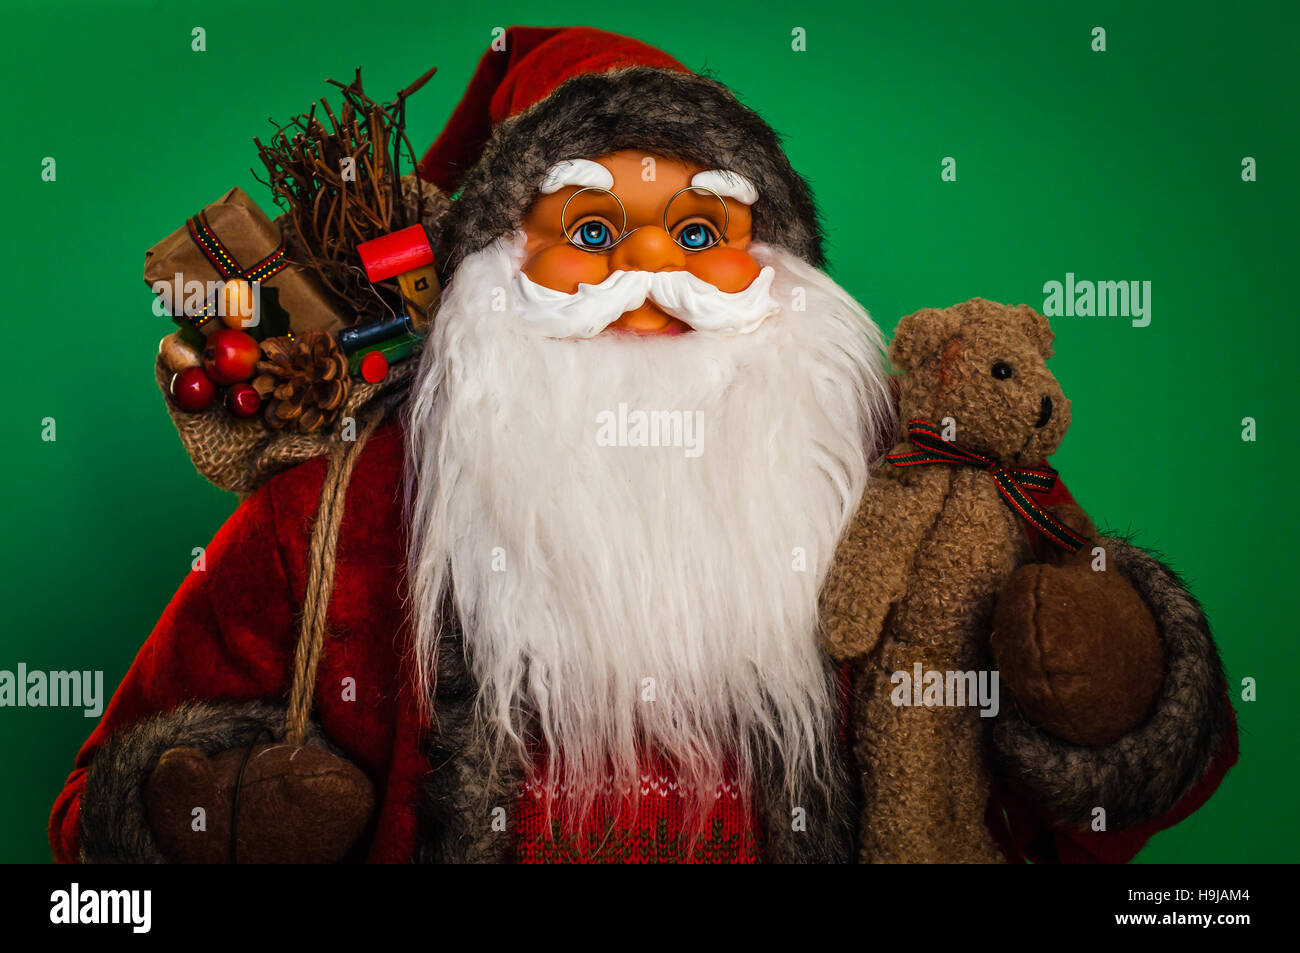 Santa Claus upper body close up with green background. Stock Photo